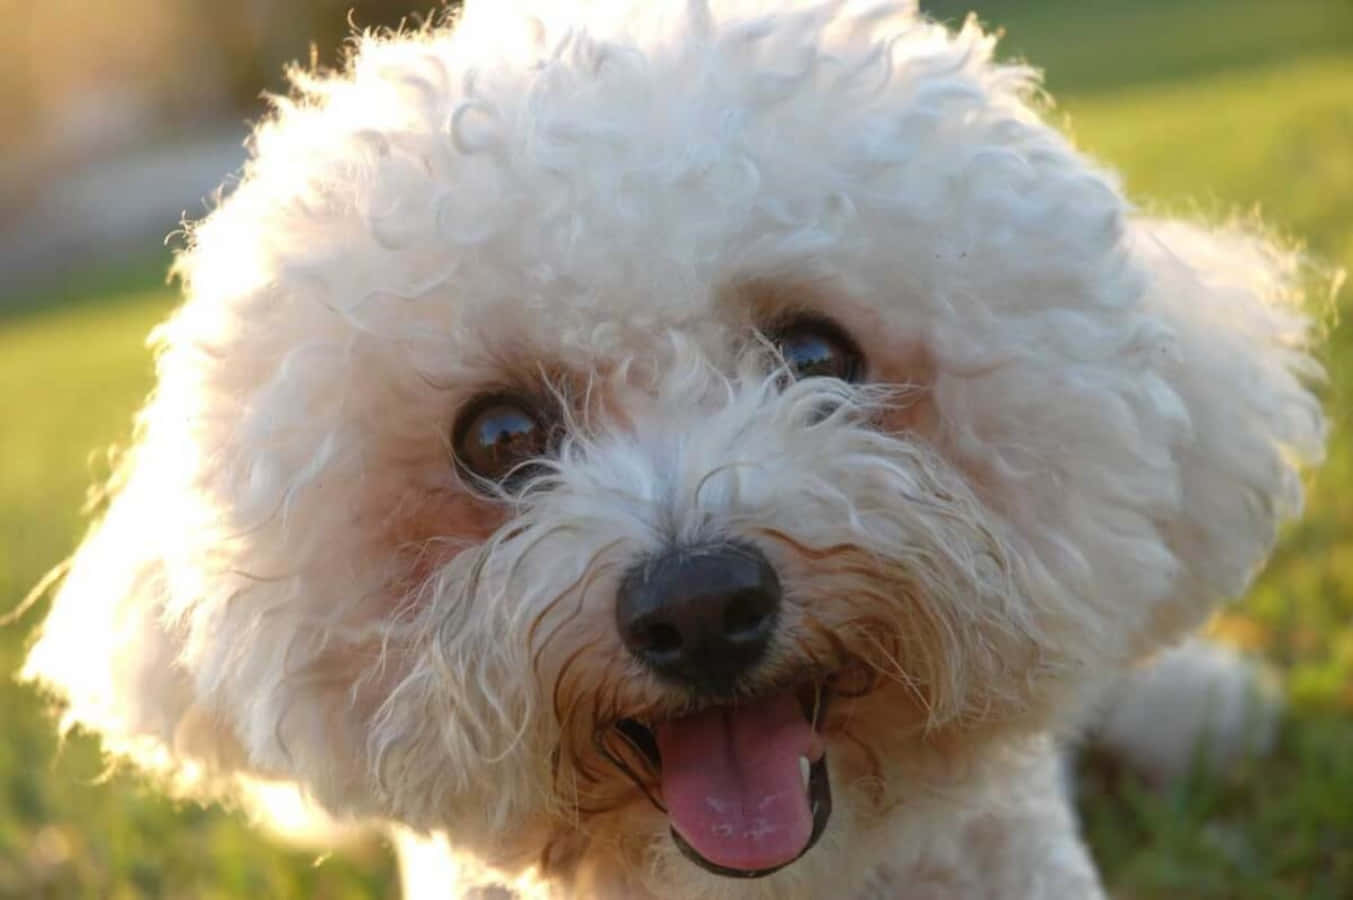 Start your day with a smile by adopting this happy Bichon Frise pup!